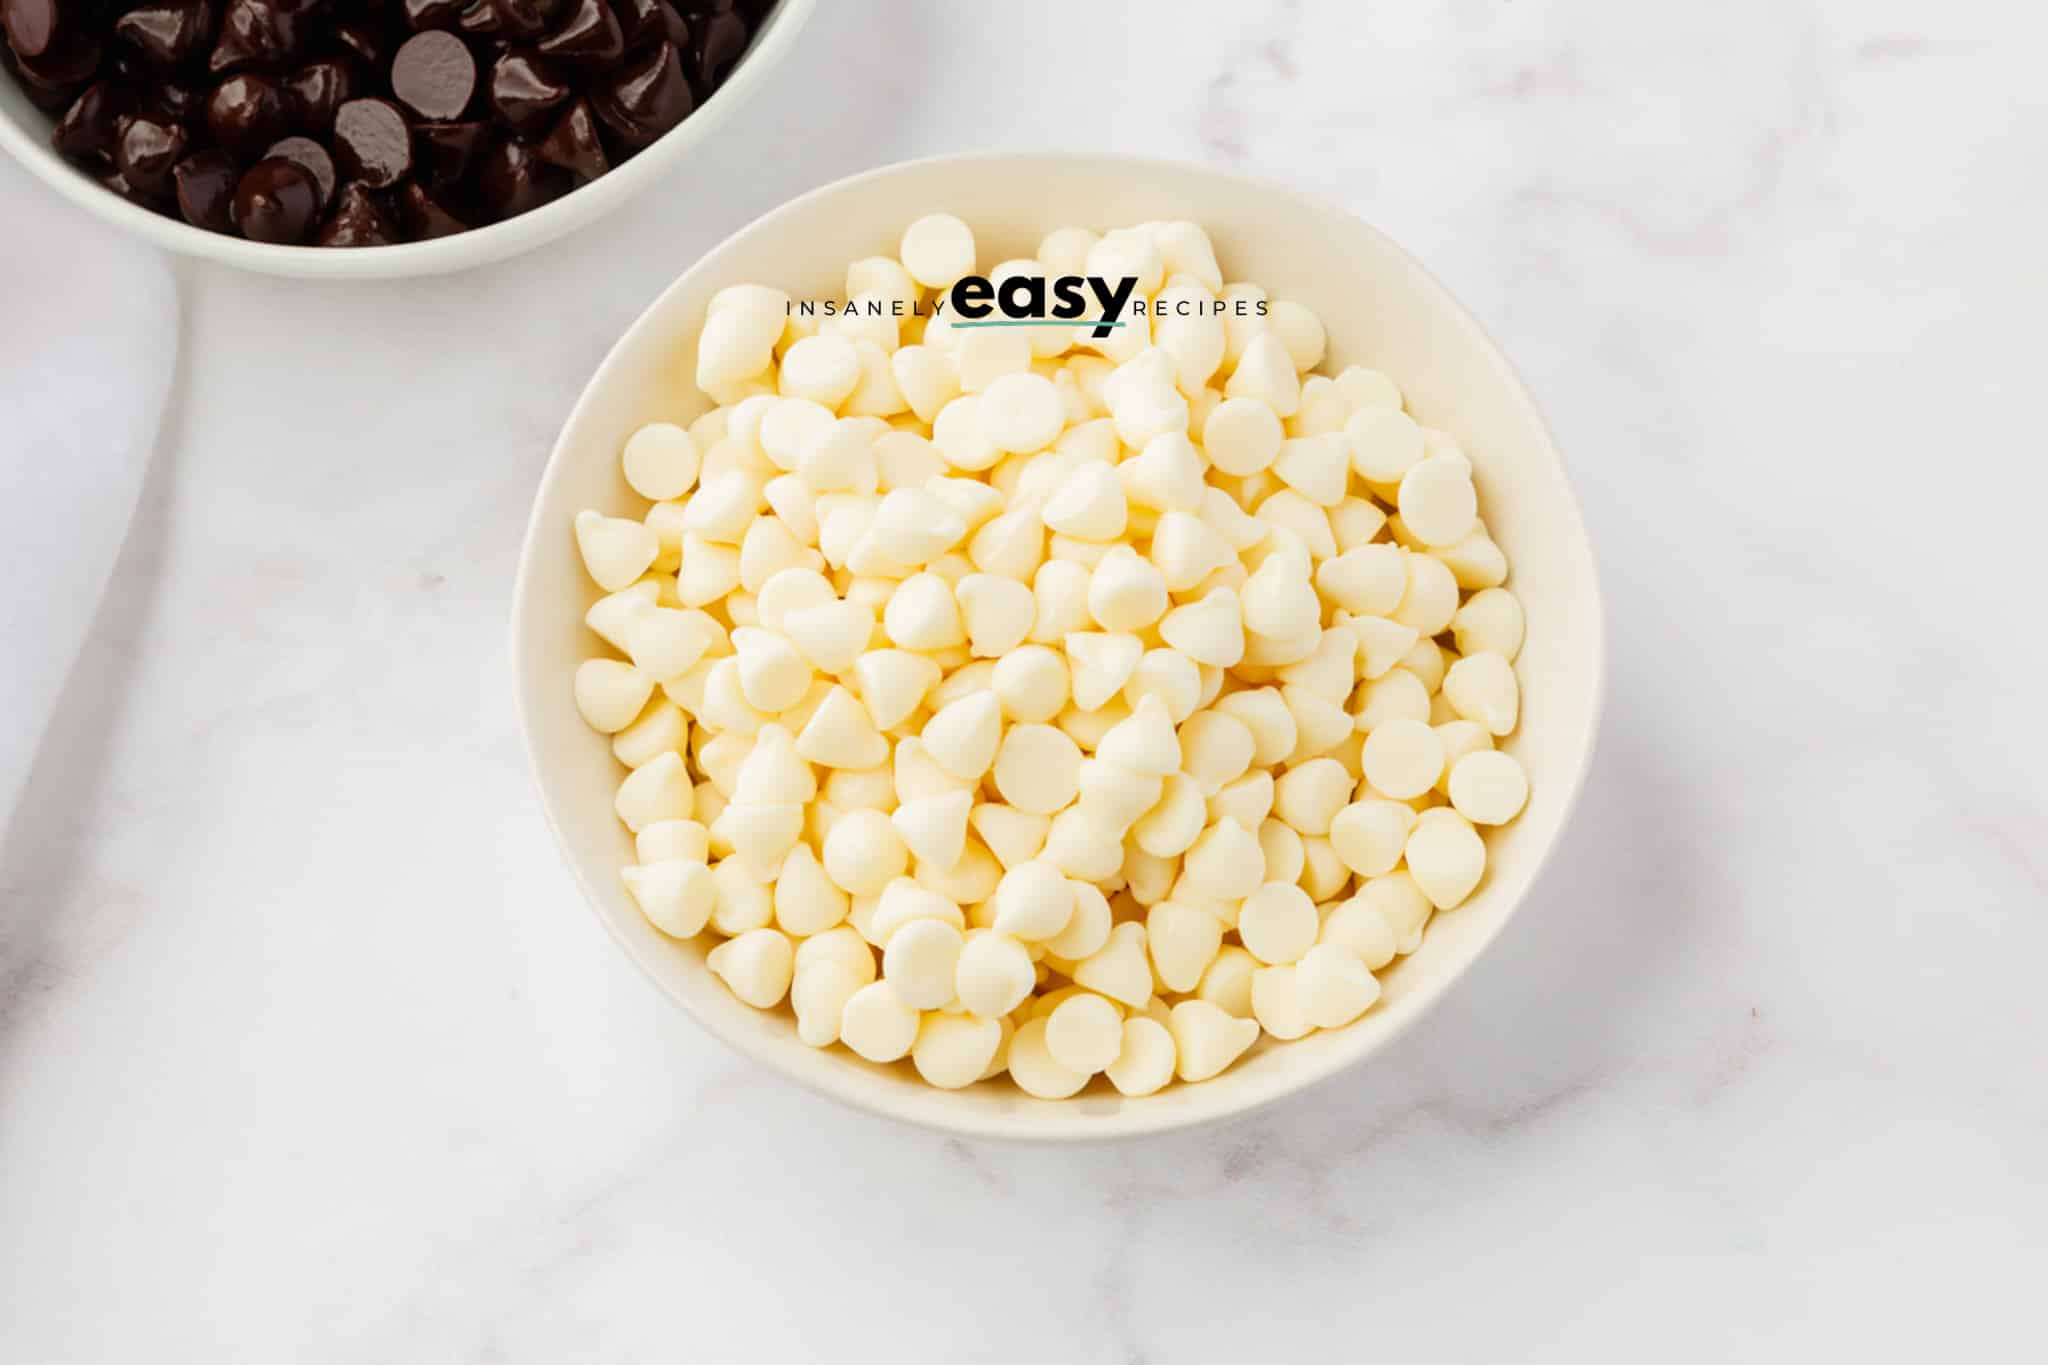 white chocolate chips in a bowl